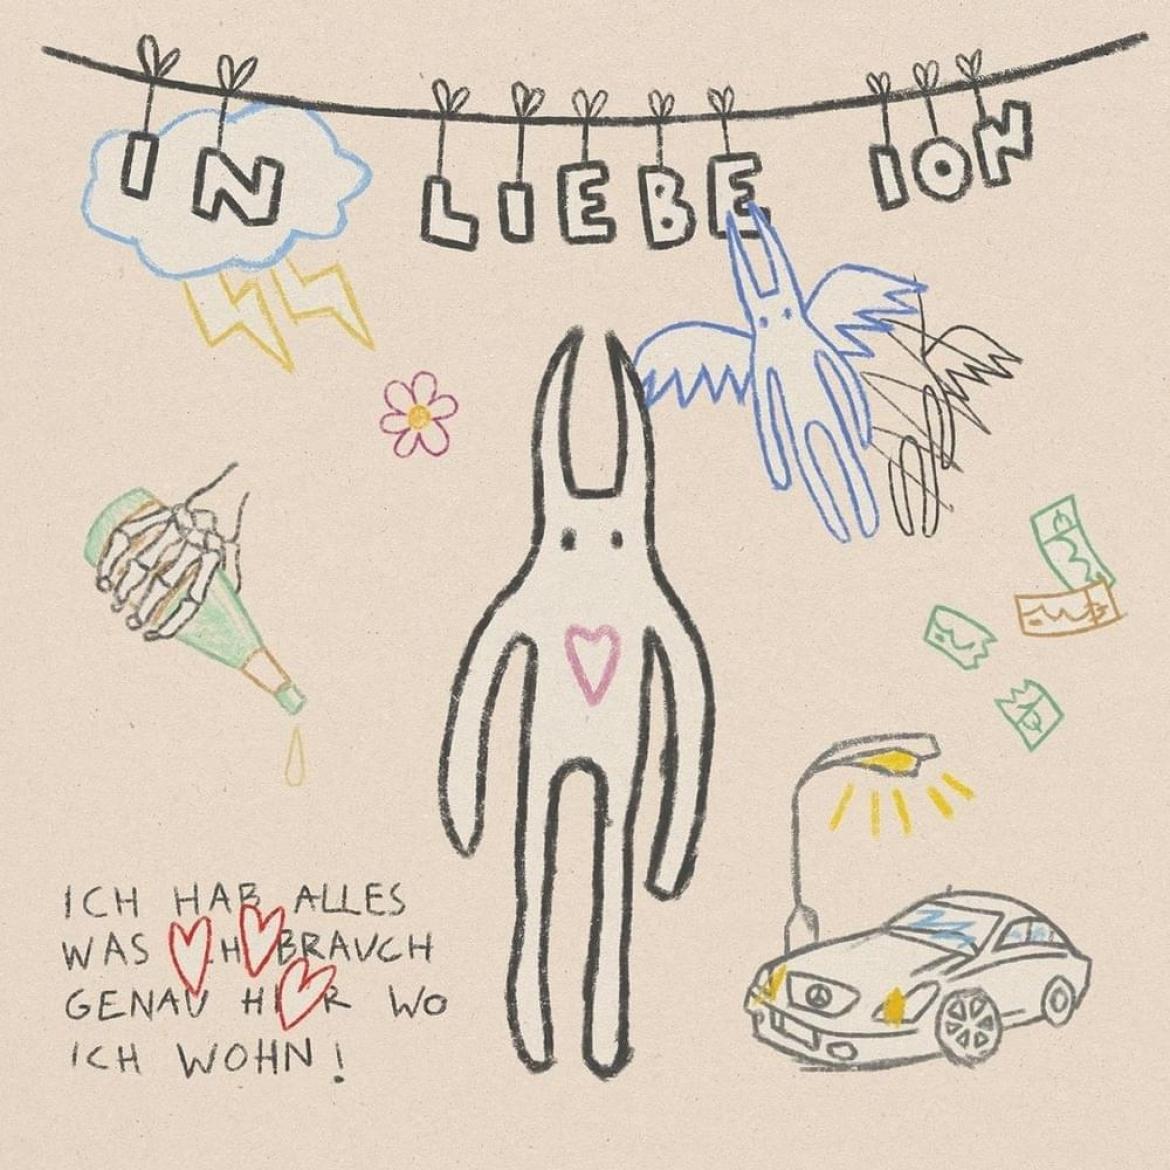 In Liebe, Ion Cover